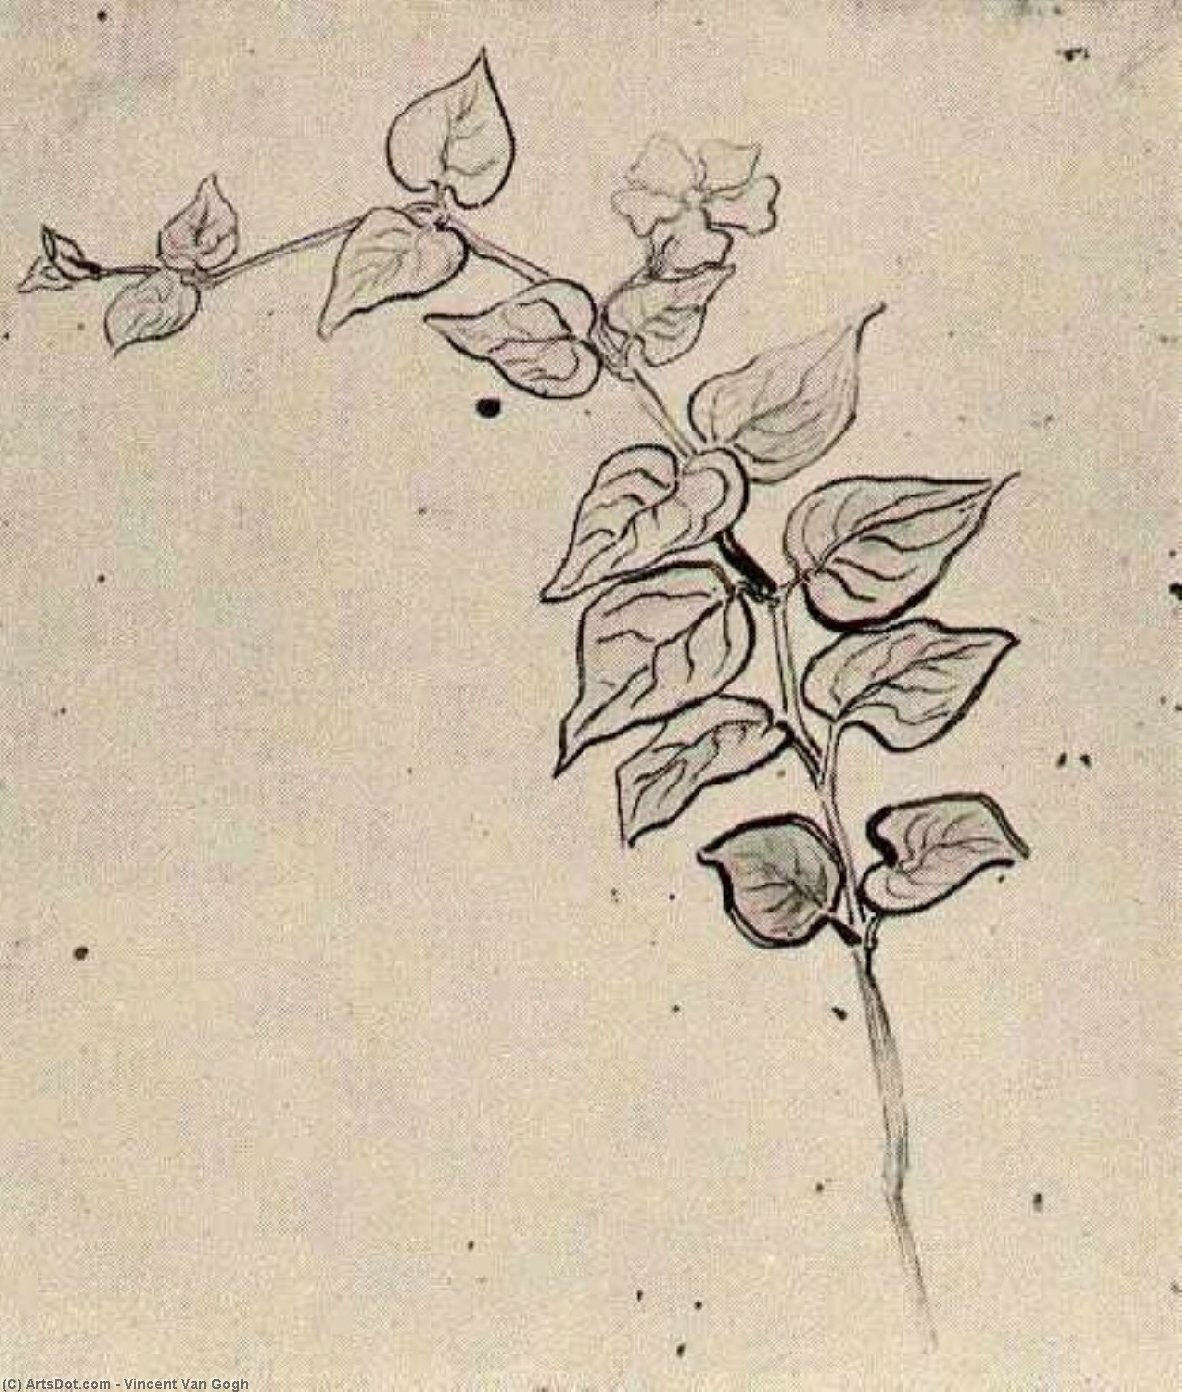 WikiOO.org - 백과 사전 - 회화, 삽화 Vincent Van Gogh - Branch with Leaves